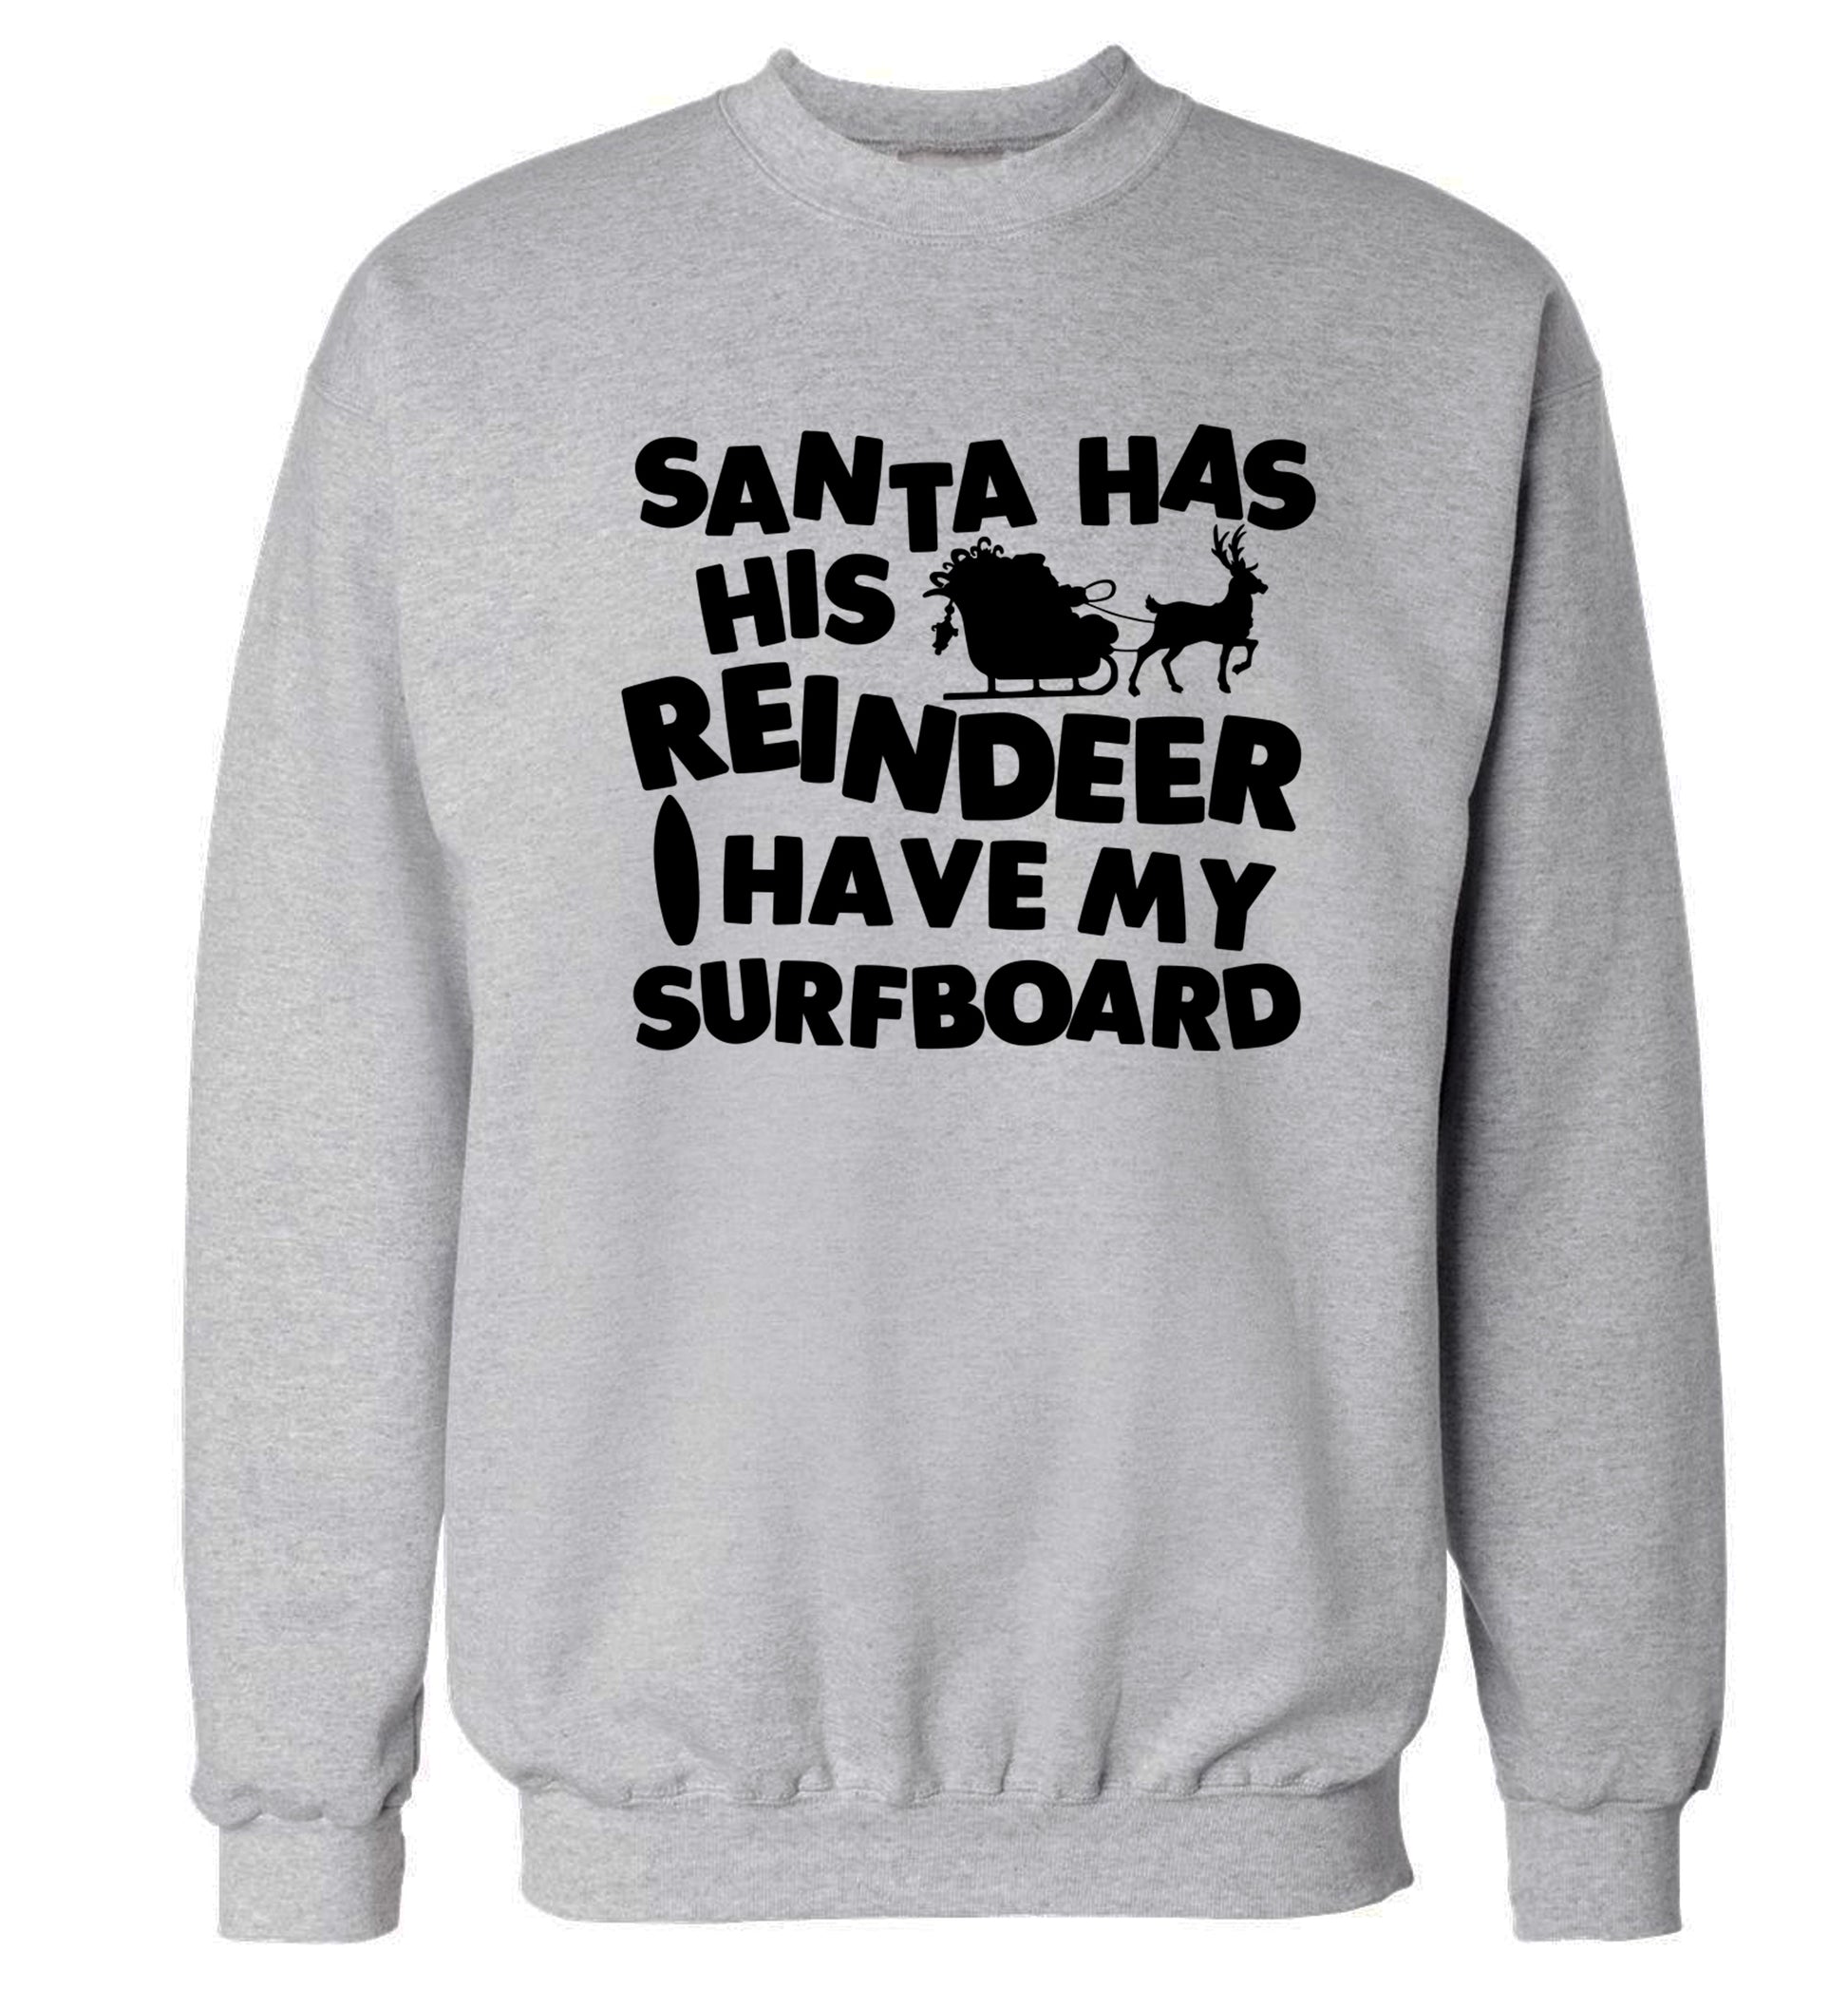 Santa has his reindeer I have my surfboard Adult's unisex grey Sweater 2XL